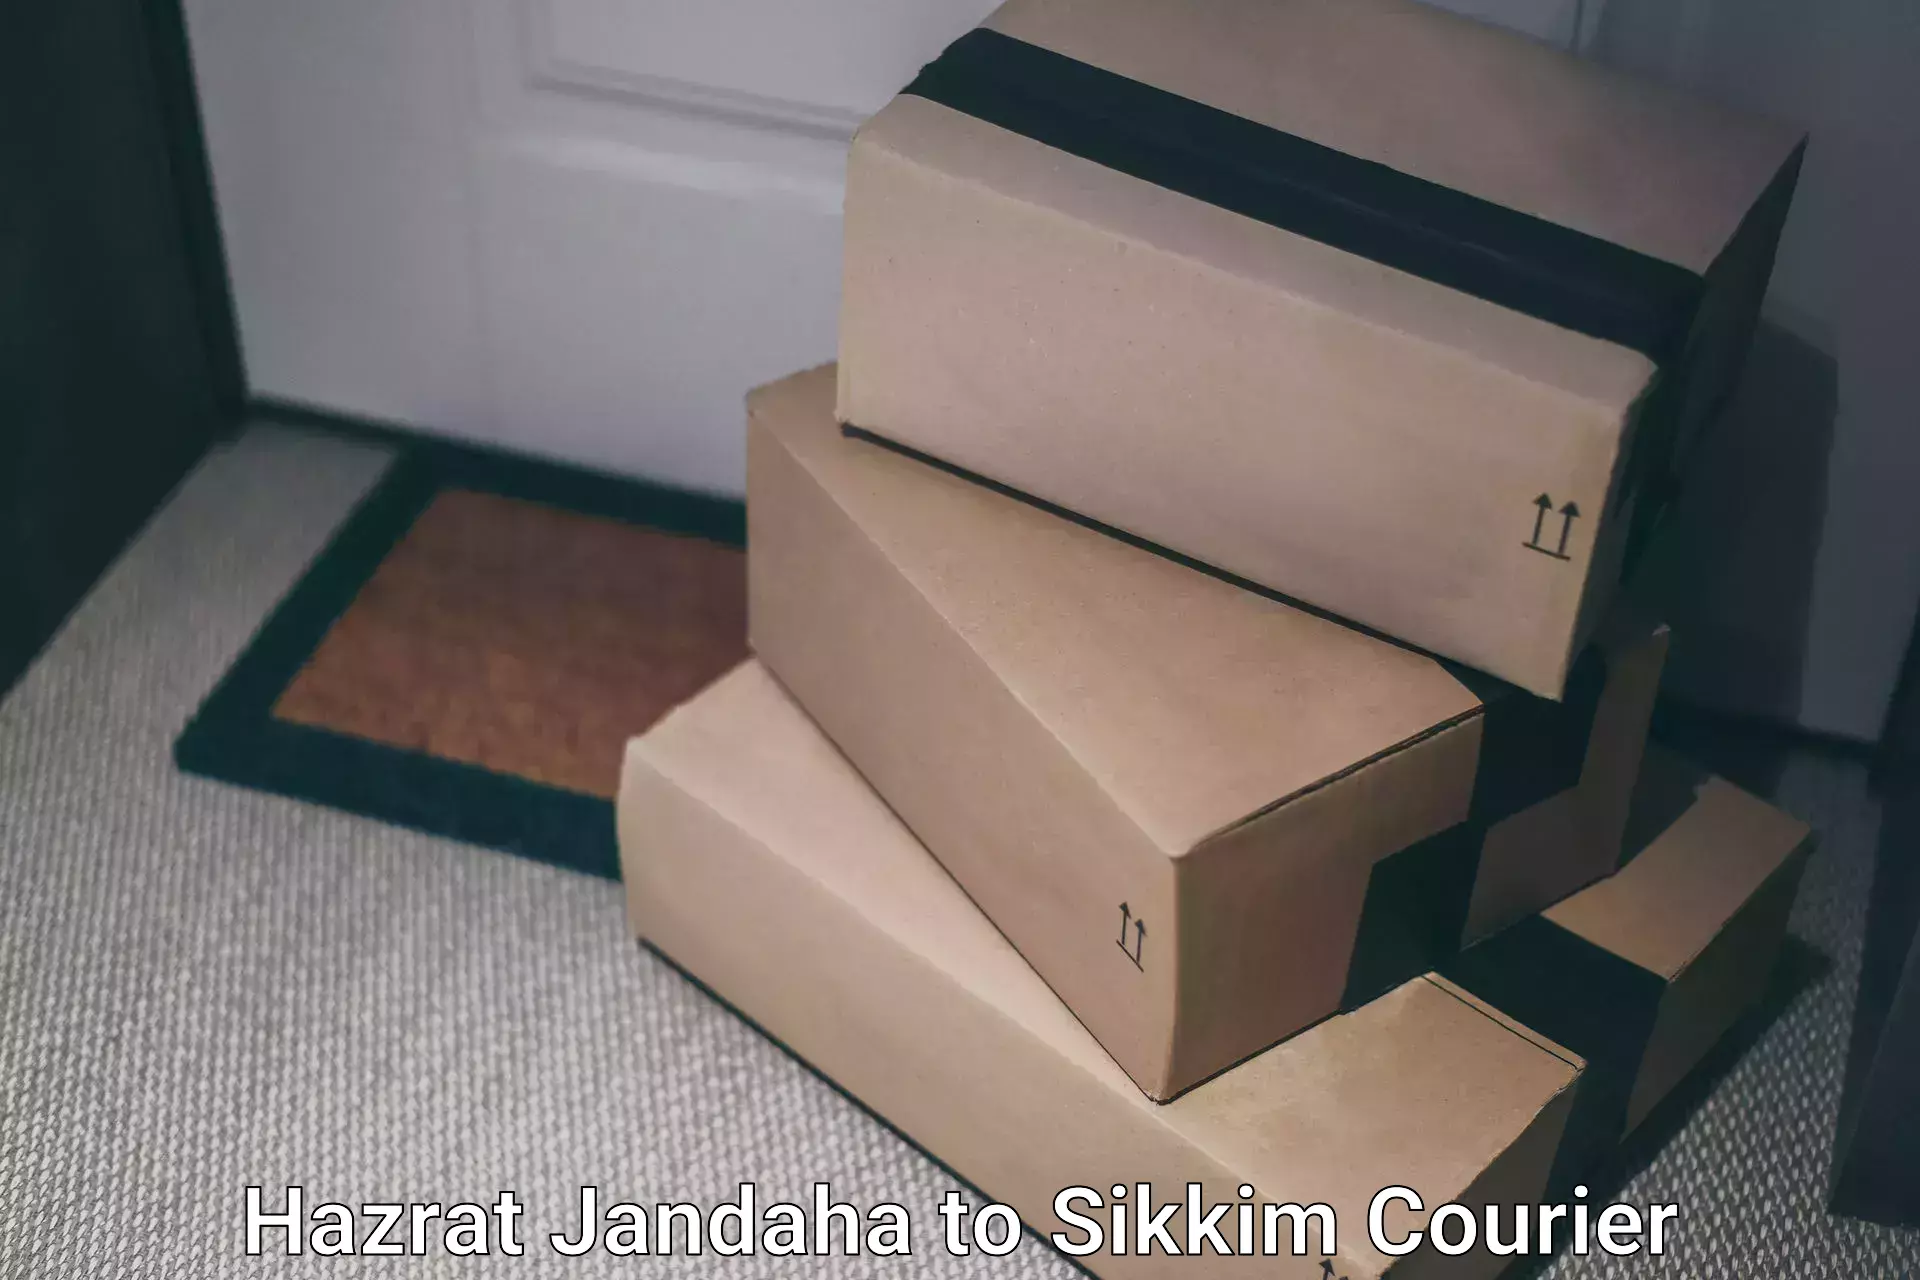 Quality courier services in Hazrat Jandaha to Pelling